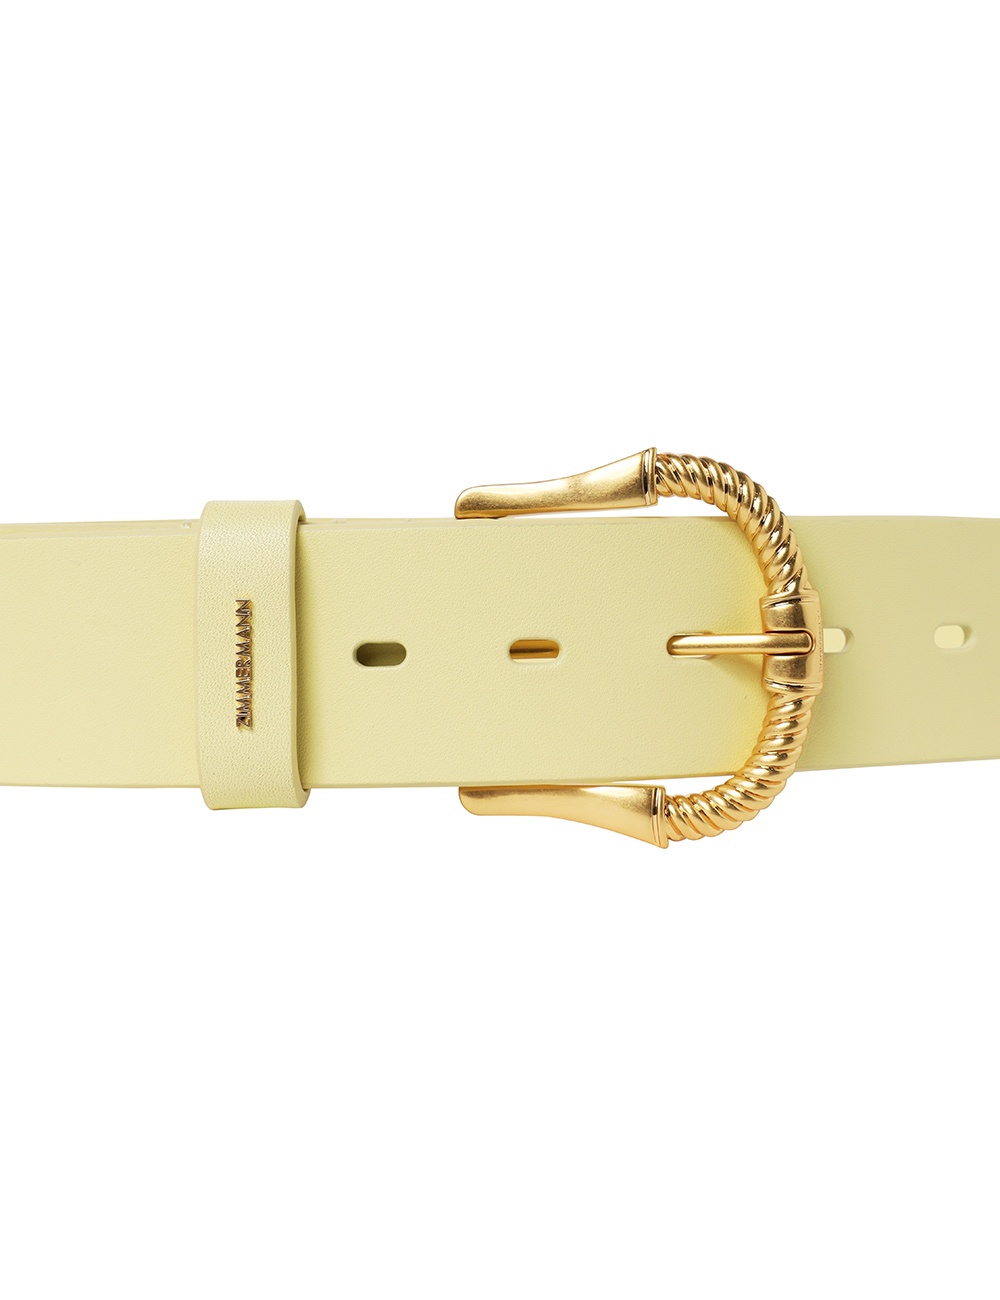 TWISTED BUCKLE LEATHER BELT 40 - 3